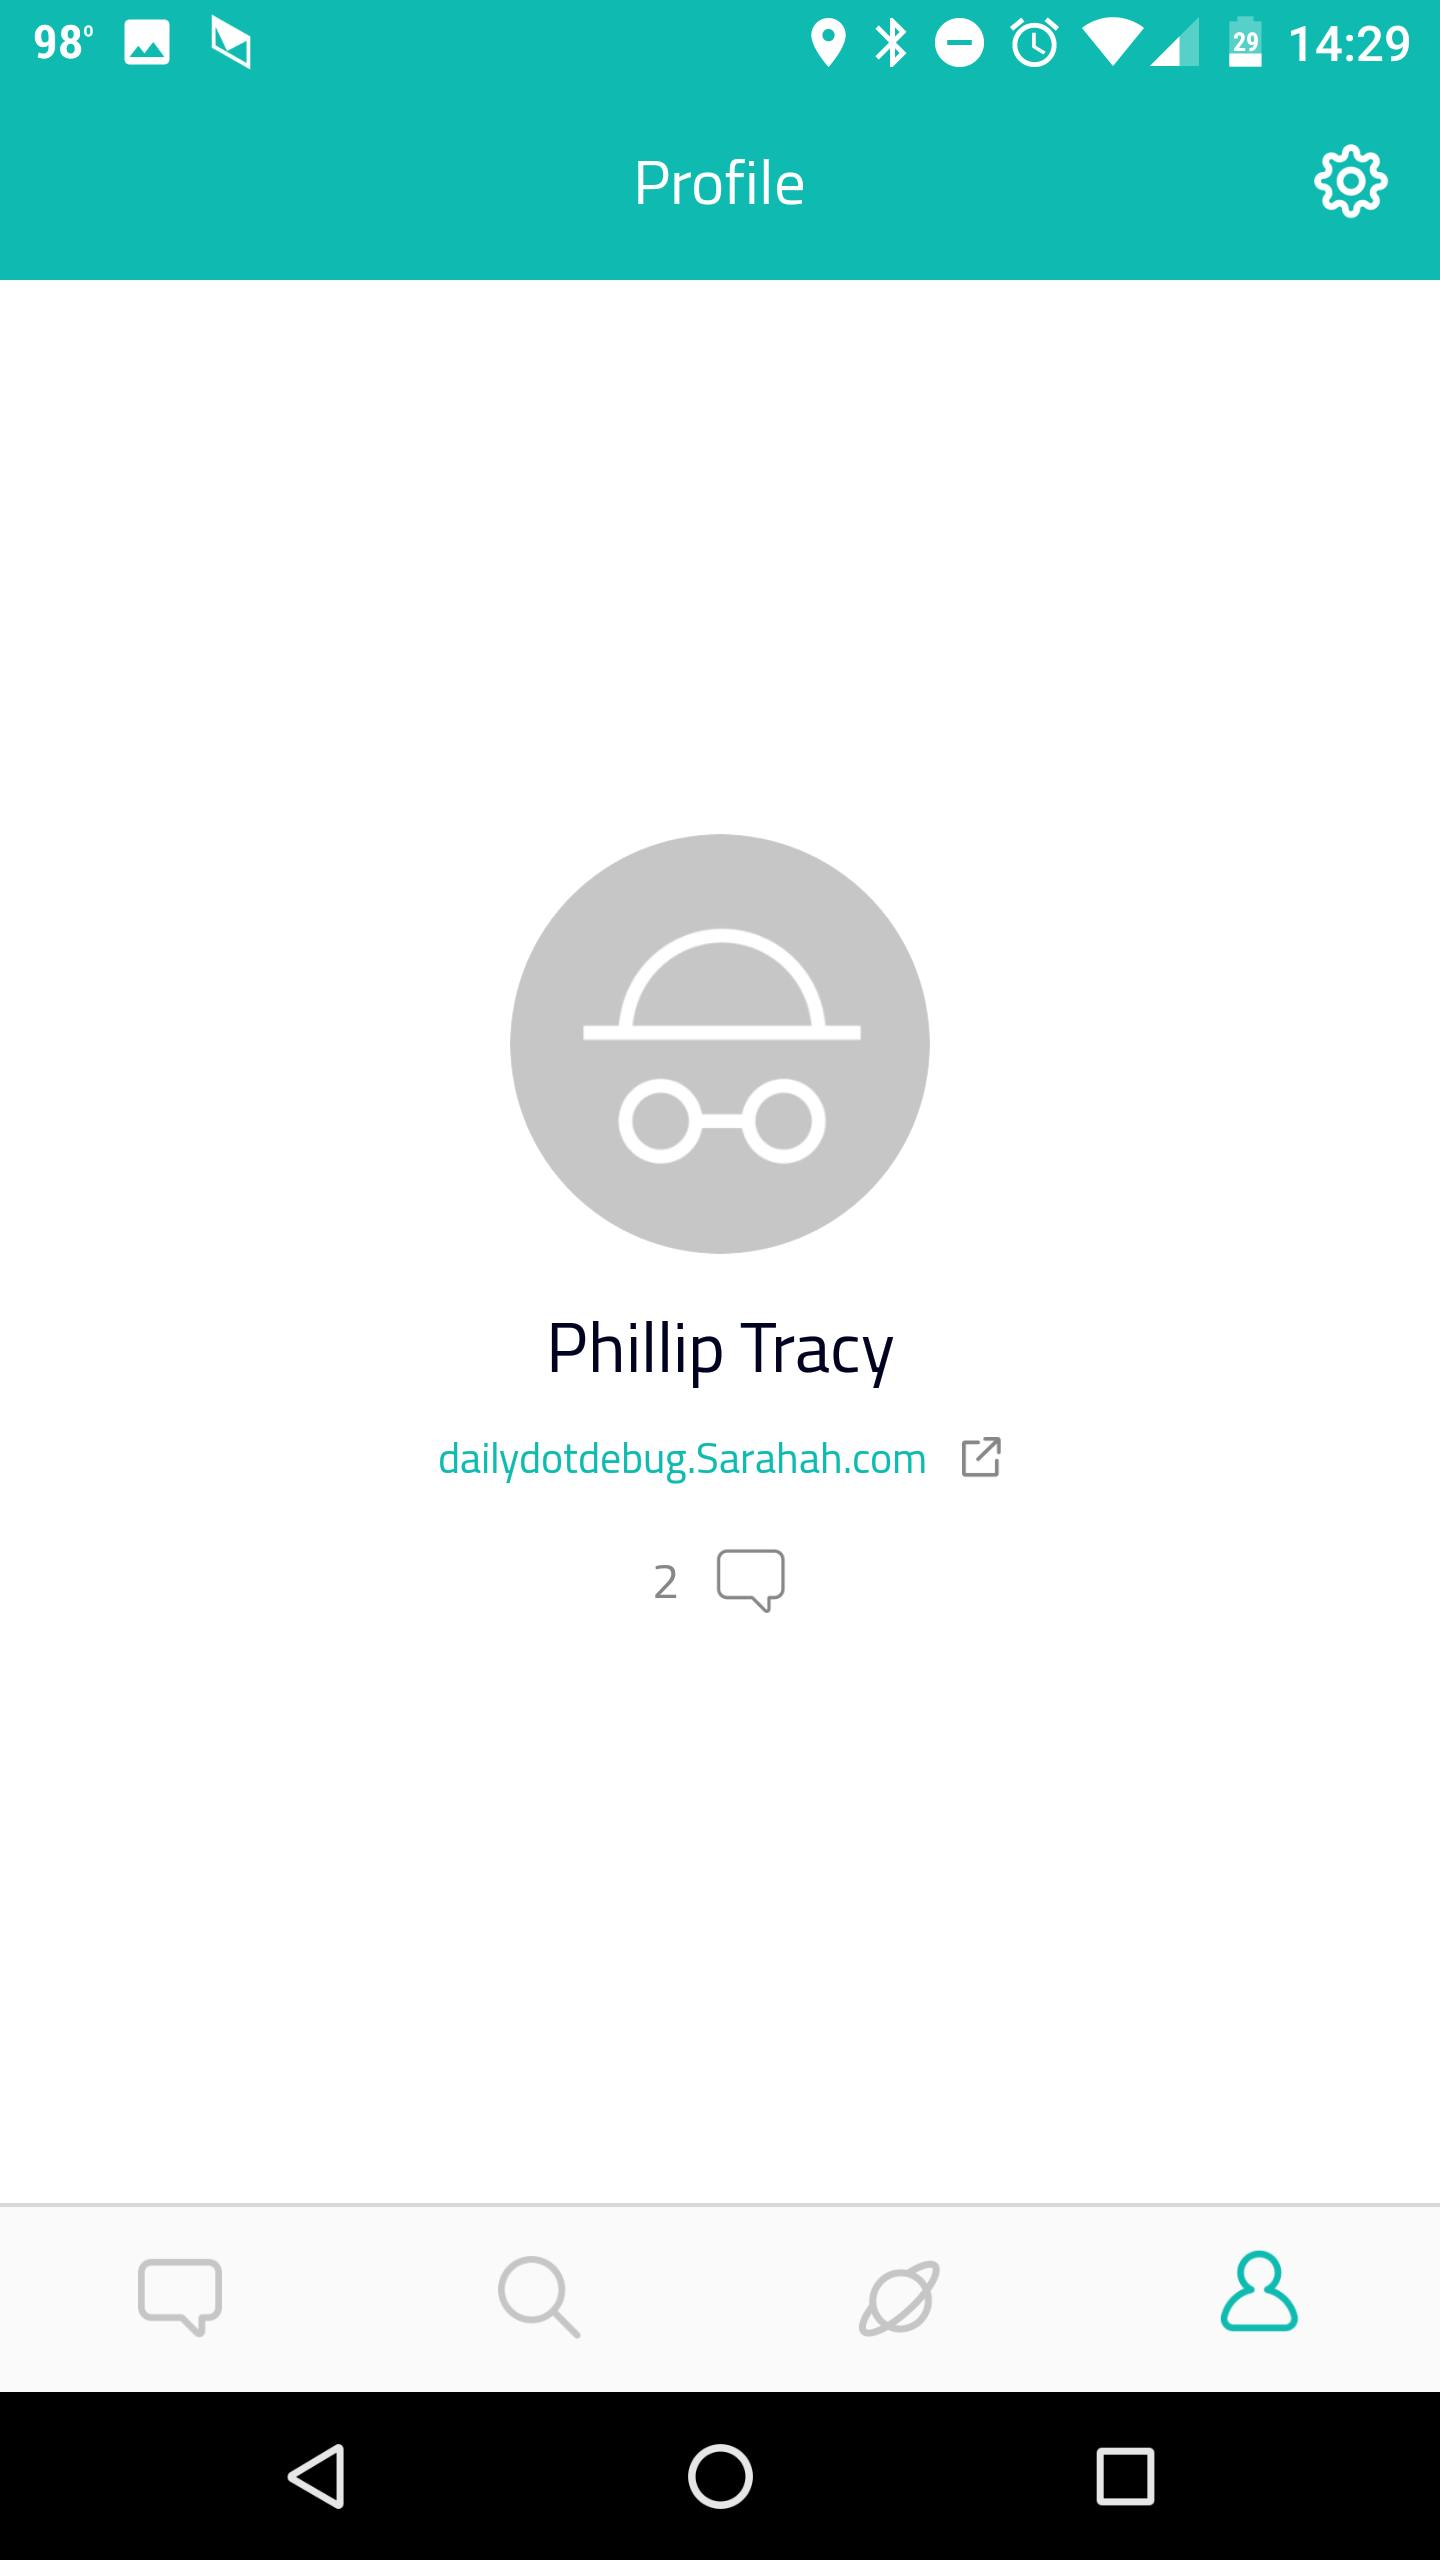 what is sarahah : profile page url